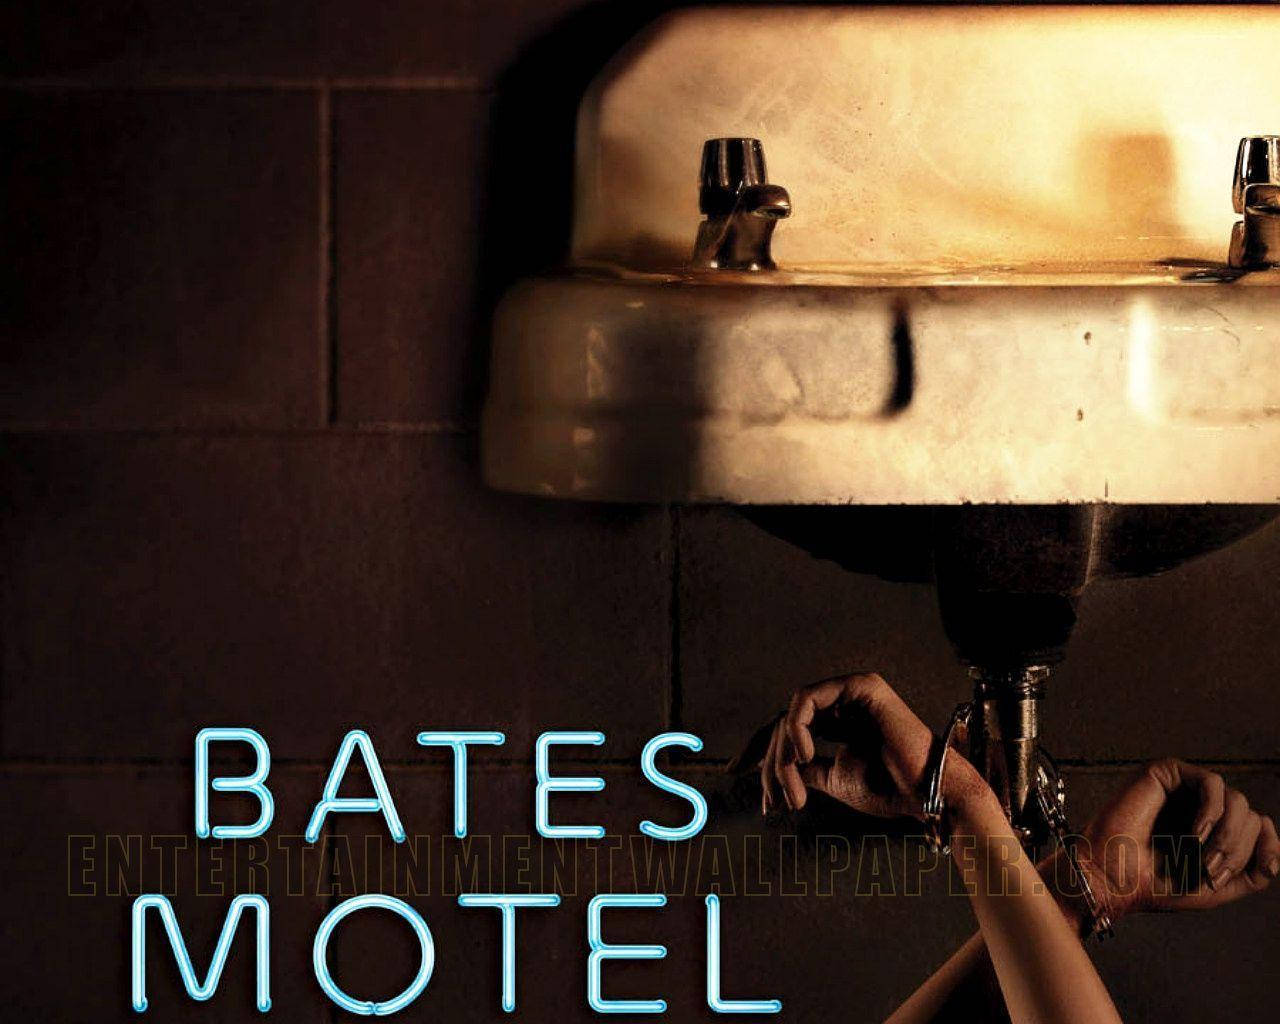 Bates Motel Handcuffed To A Sink Wallpaper